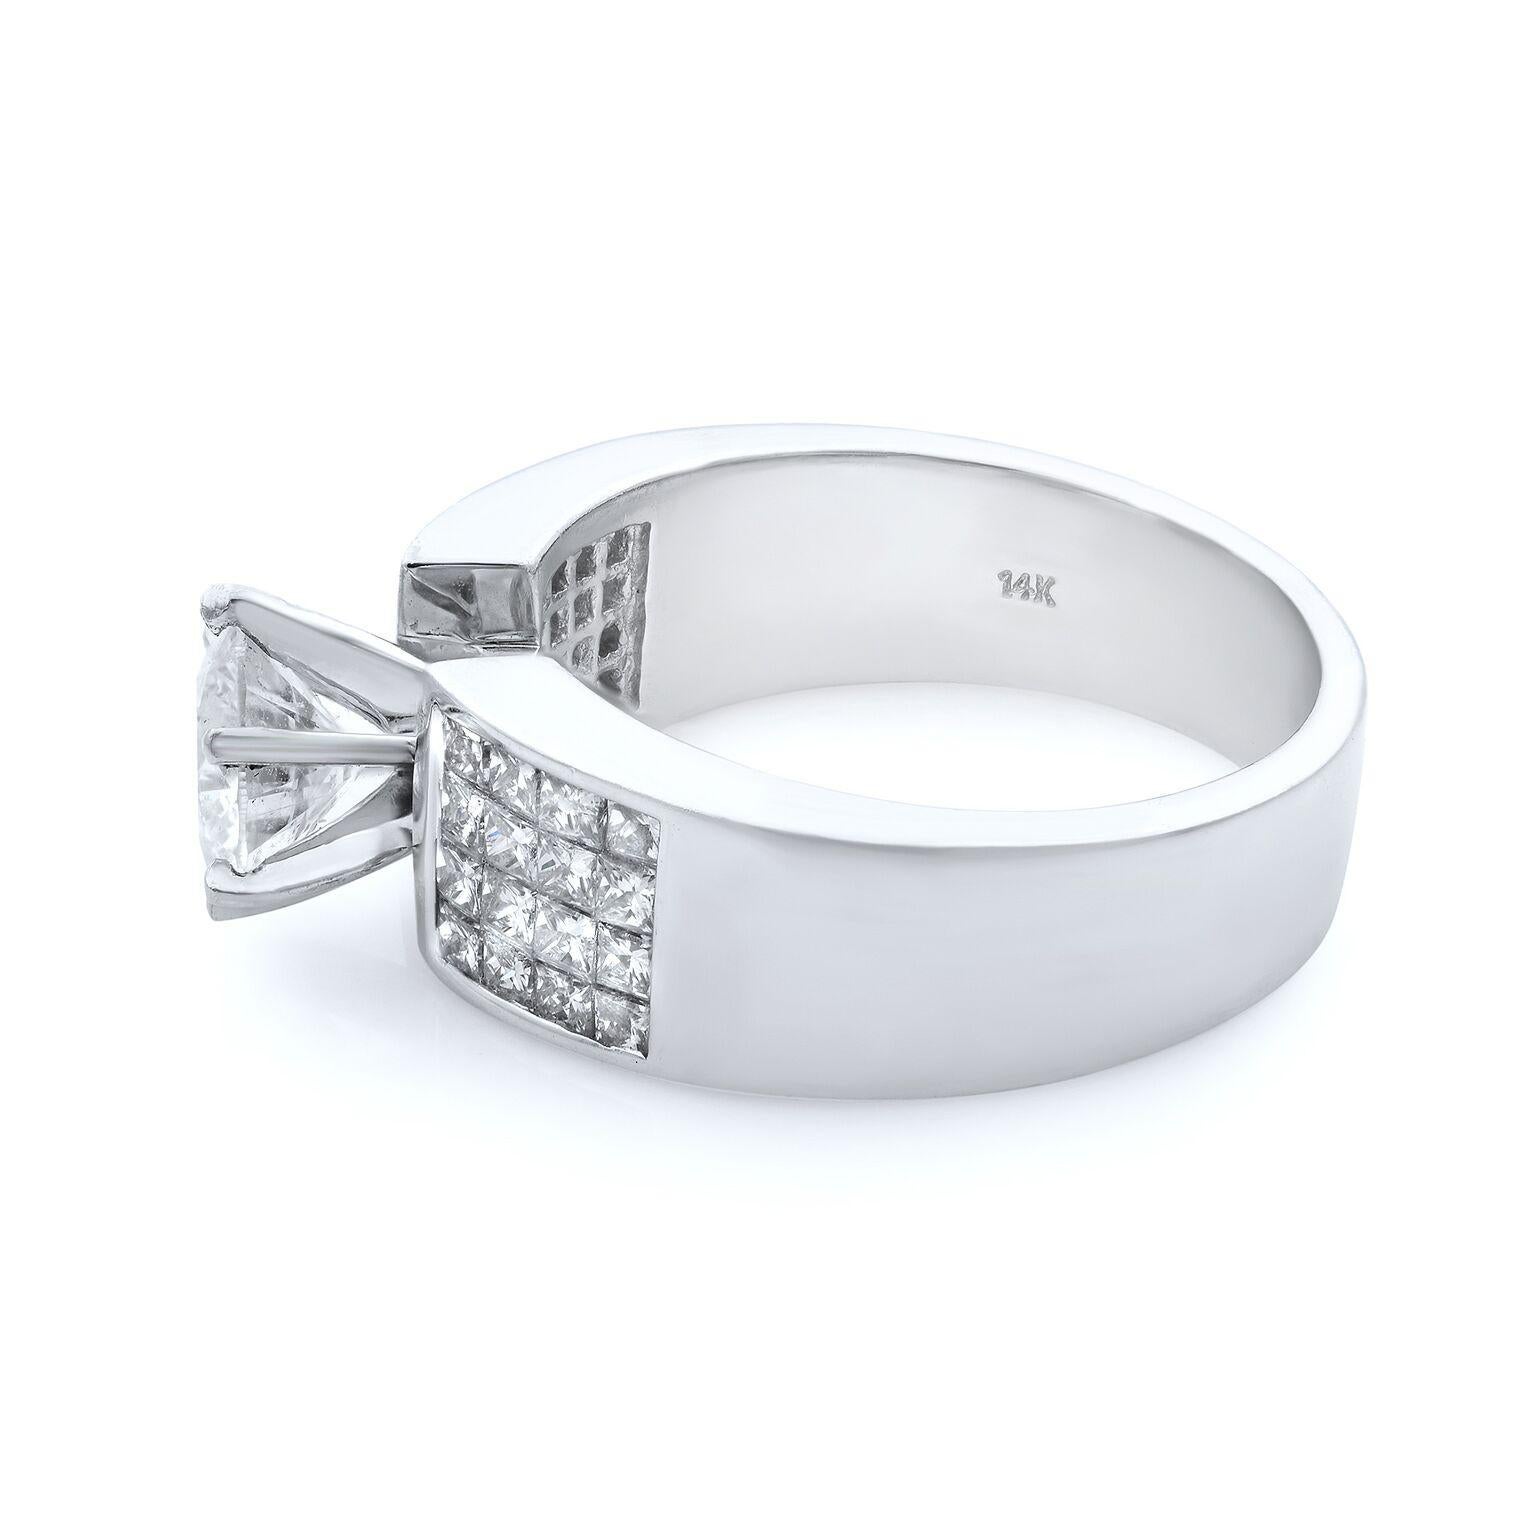 This classic wedding setting exudes elegance and brilliance with 14k princess cut channel set diamond shank with a round cut center diamond. Each diamond has been hand-selected for superior sparkle and is channel-set in quality. Total carat weight